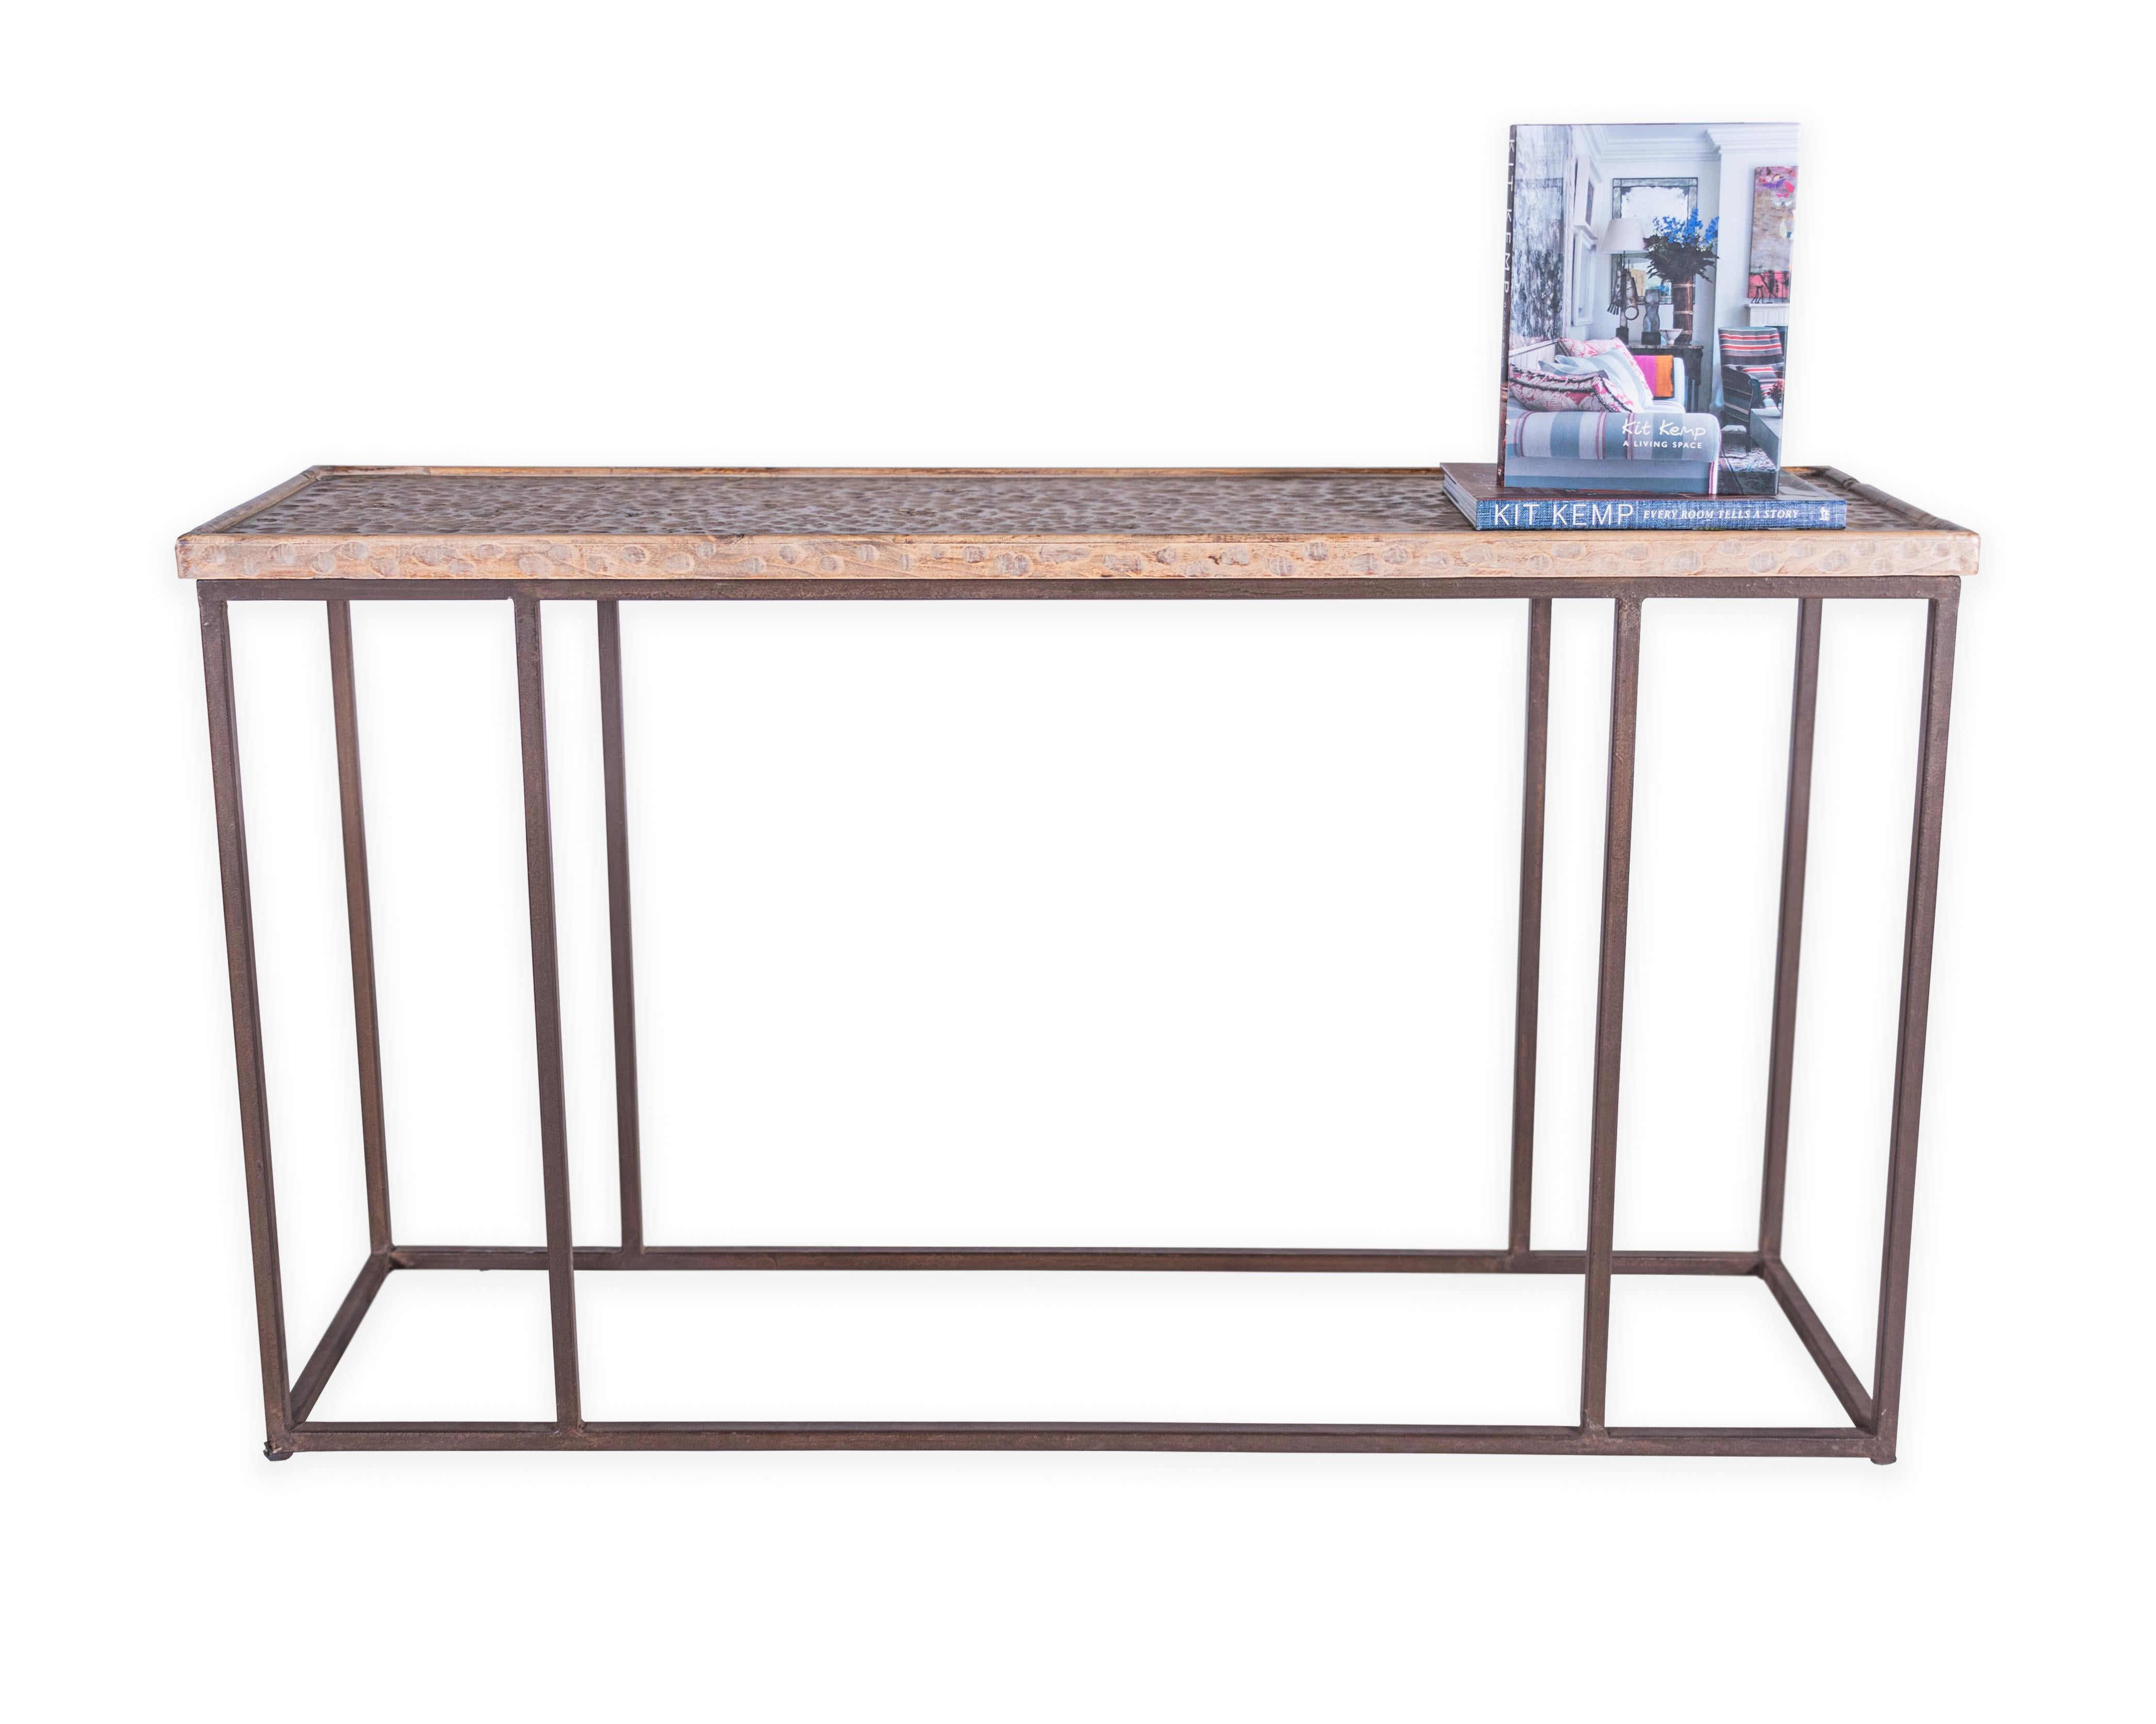 Steel Base Console with 